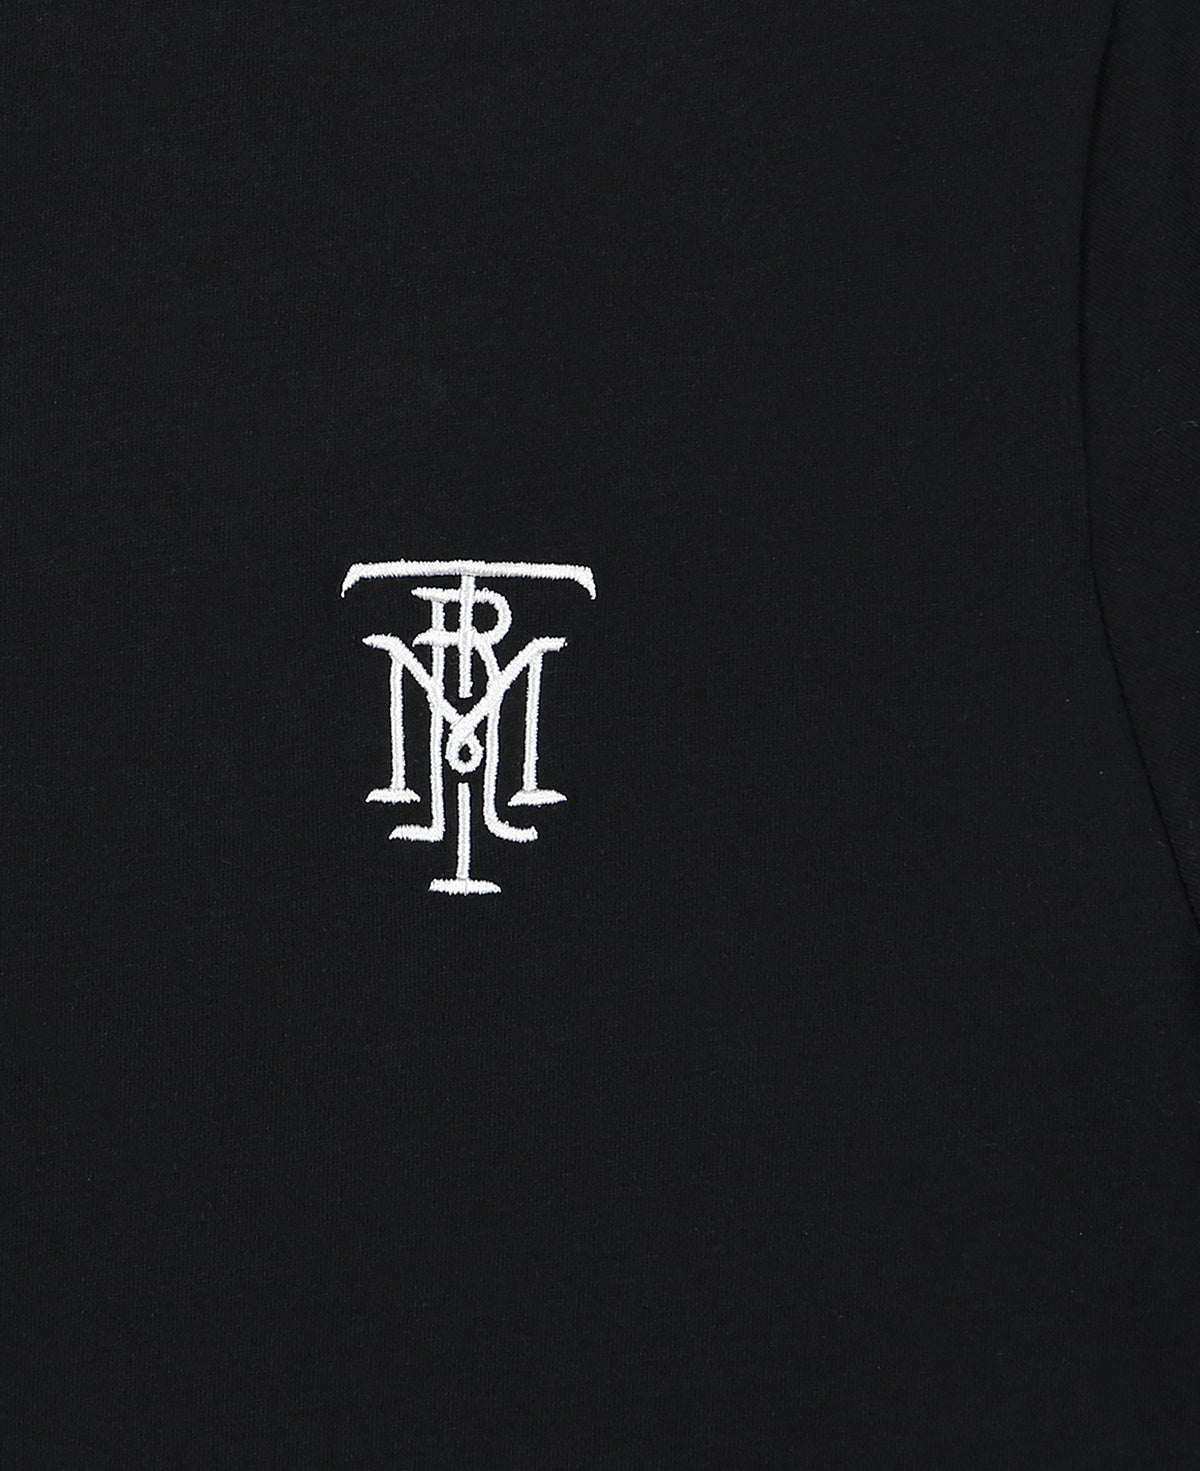 MONTROI EMBROIDERED T-SHIRT